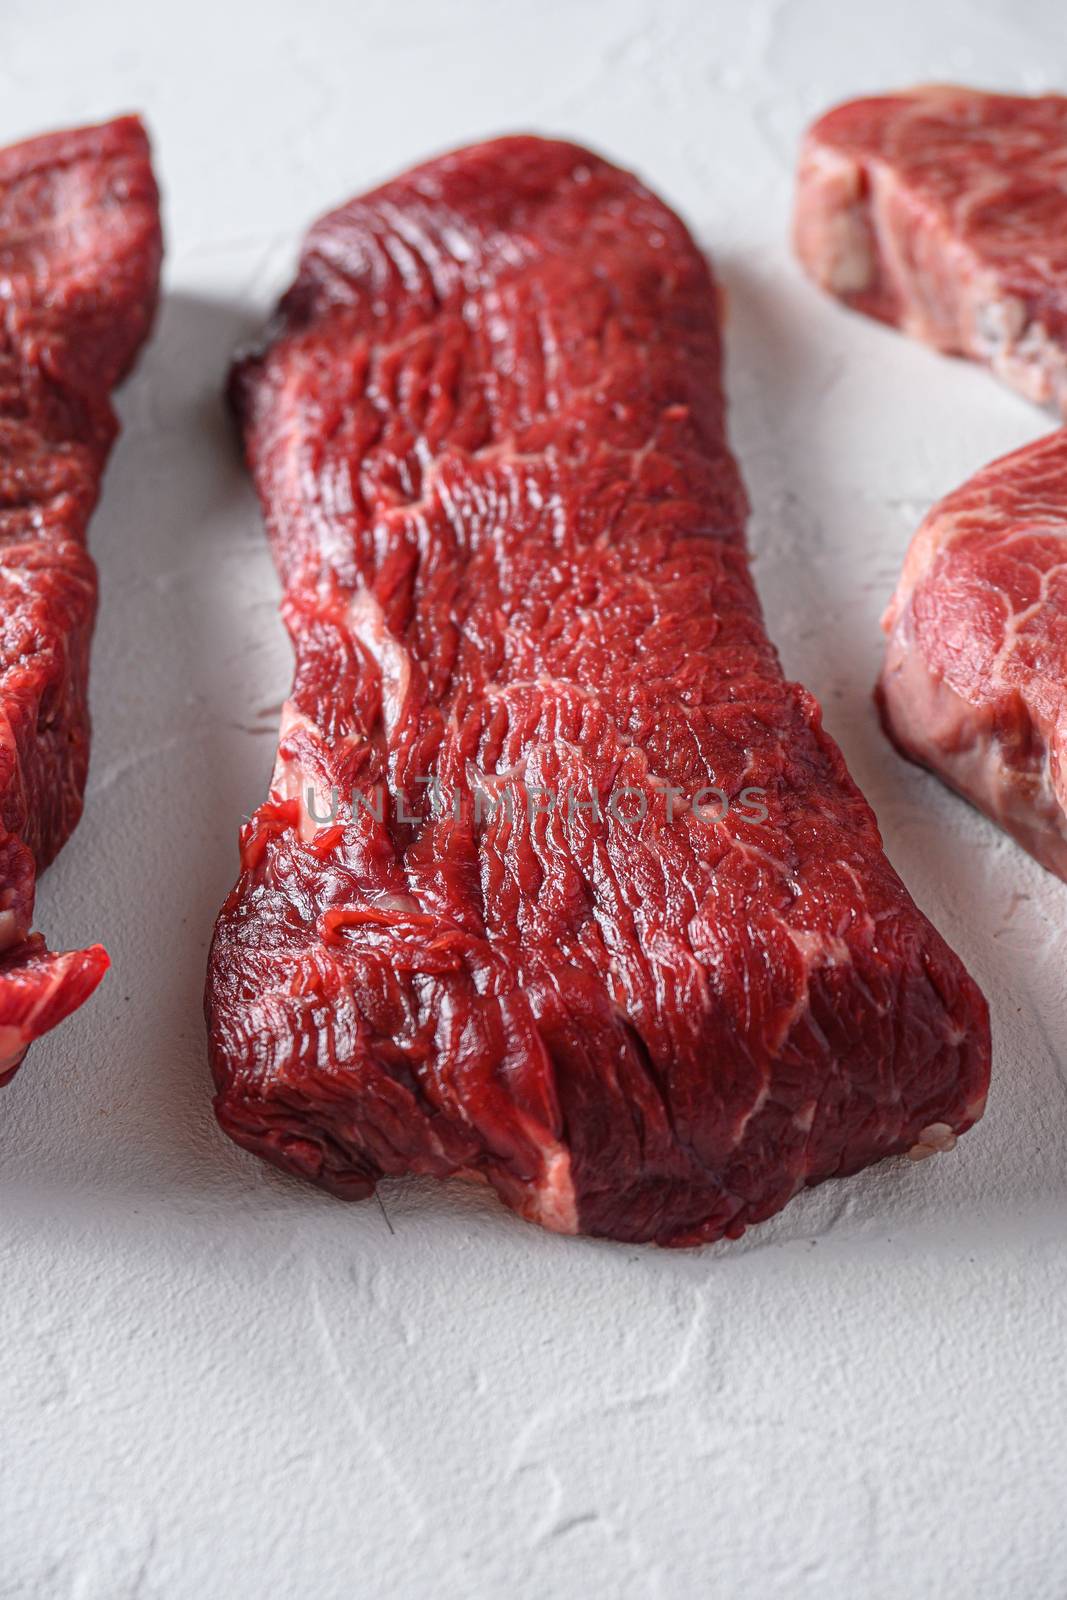 Raw tri-tip triangle roast or bottom sirloin steak cut organic meat cut side view close up over white concrete background vertical selective focus.